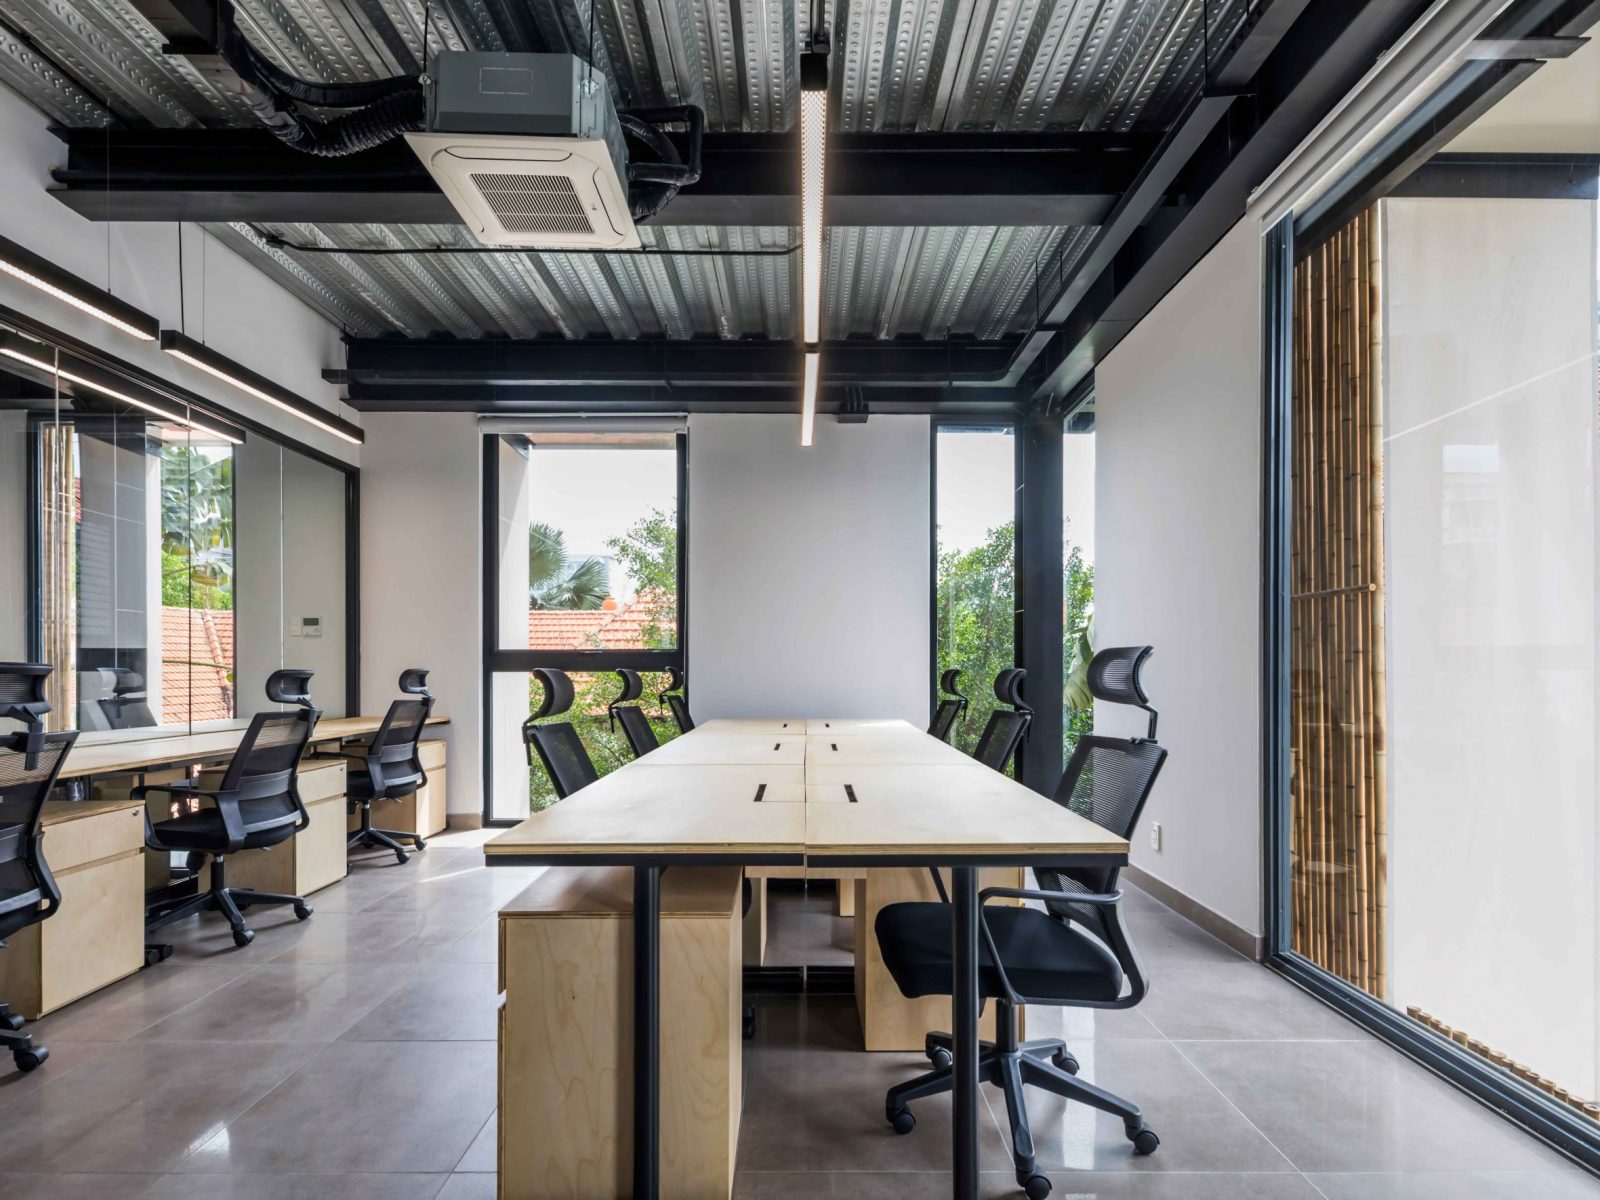 dreamplex-coworking-office-sustainable-design-t3architects-vietnam-028-scaled